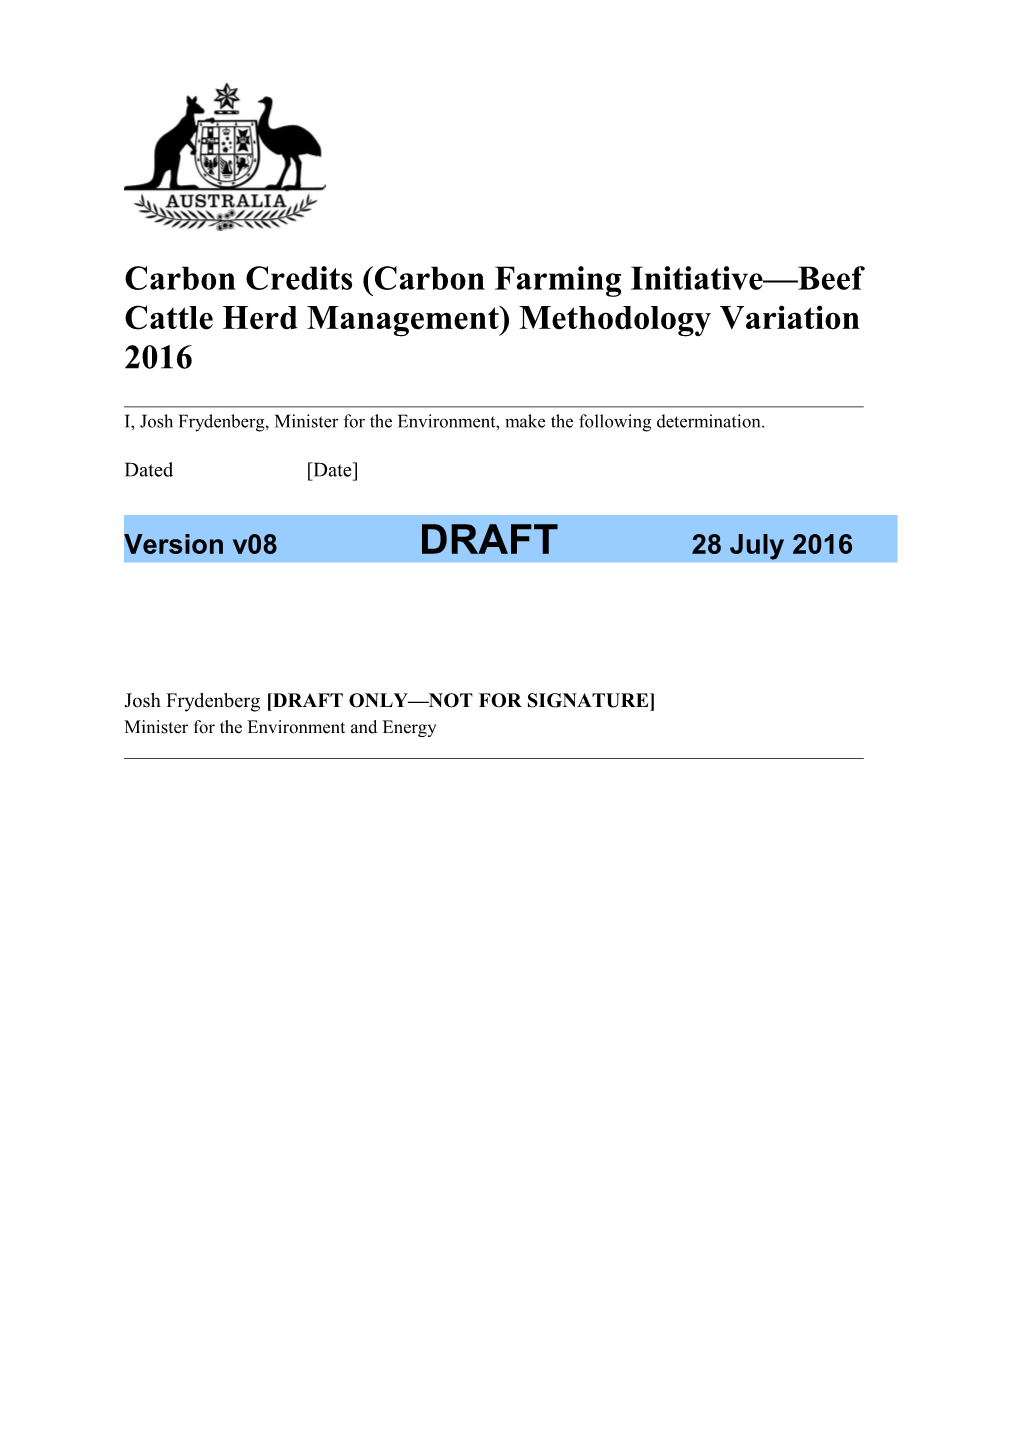 Carbon Credits (Carbon Farming Initiative Beef Cattle Herd Management) Methodology Variation